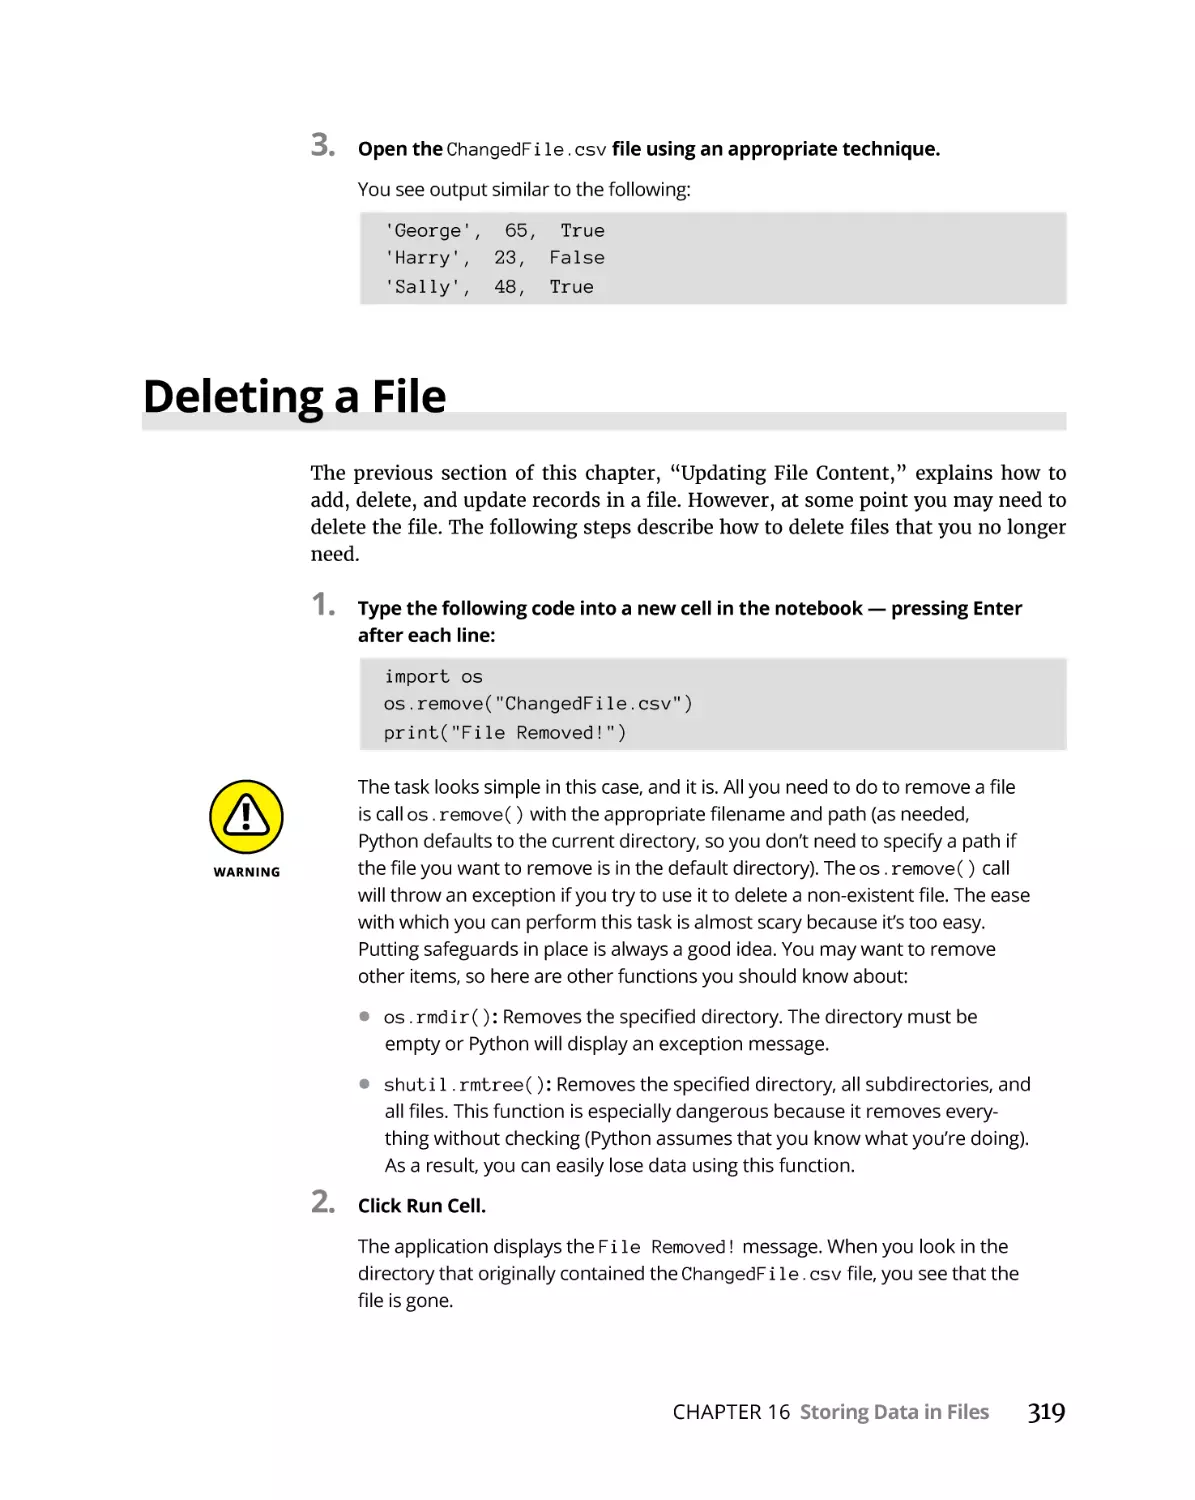 Deleting a File